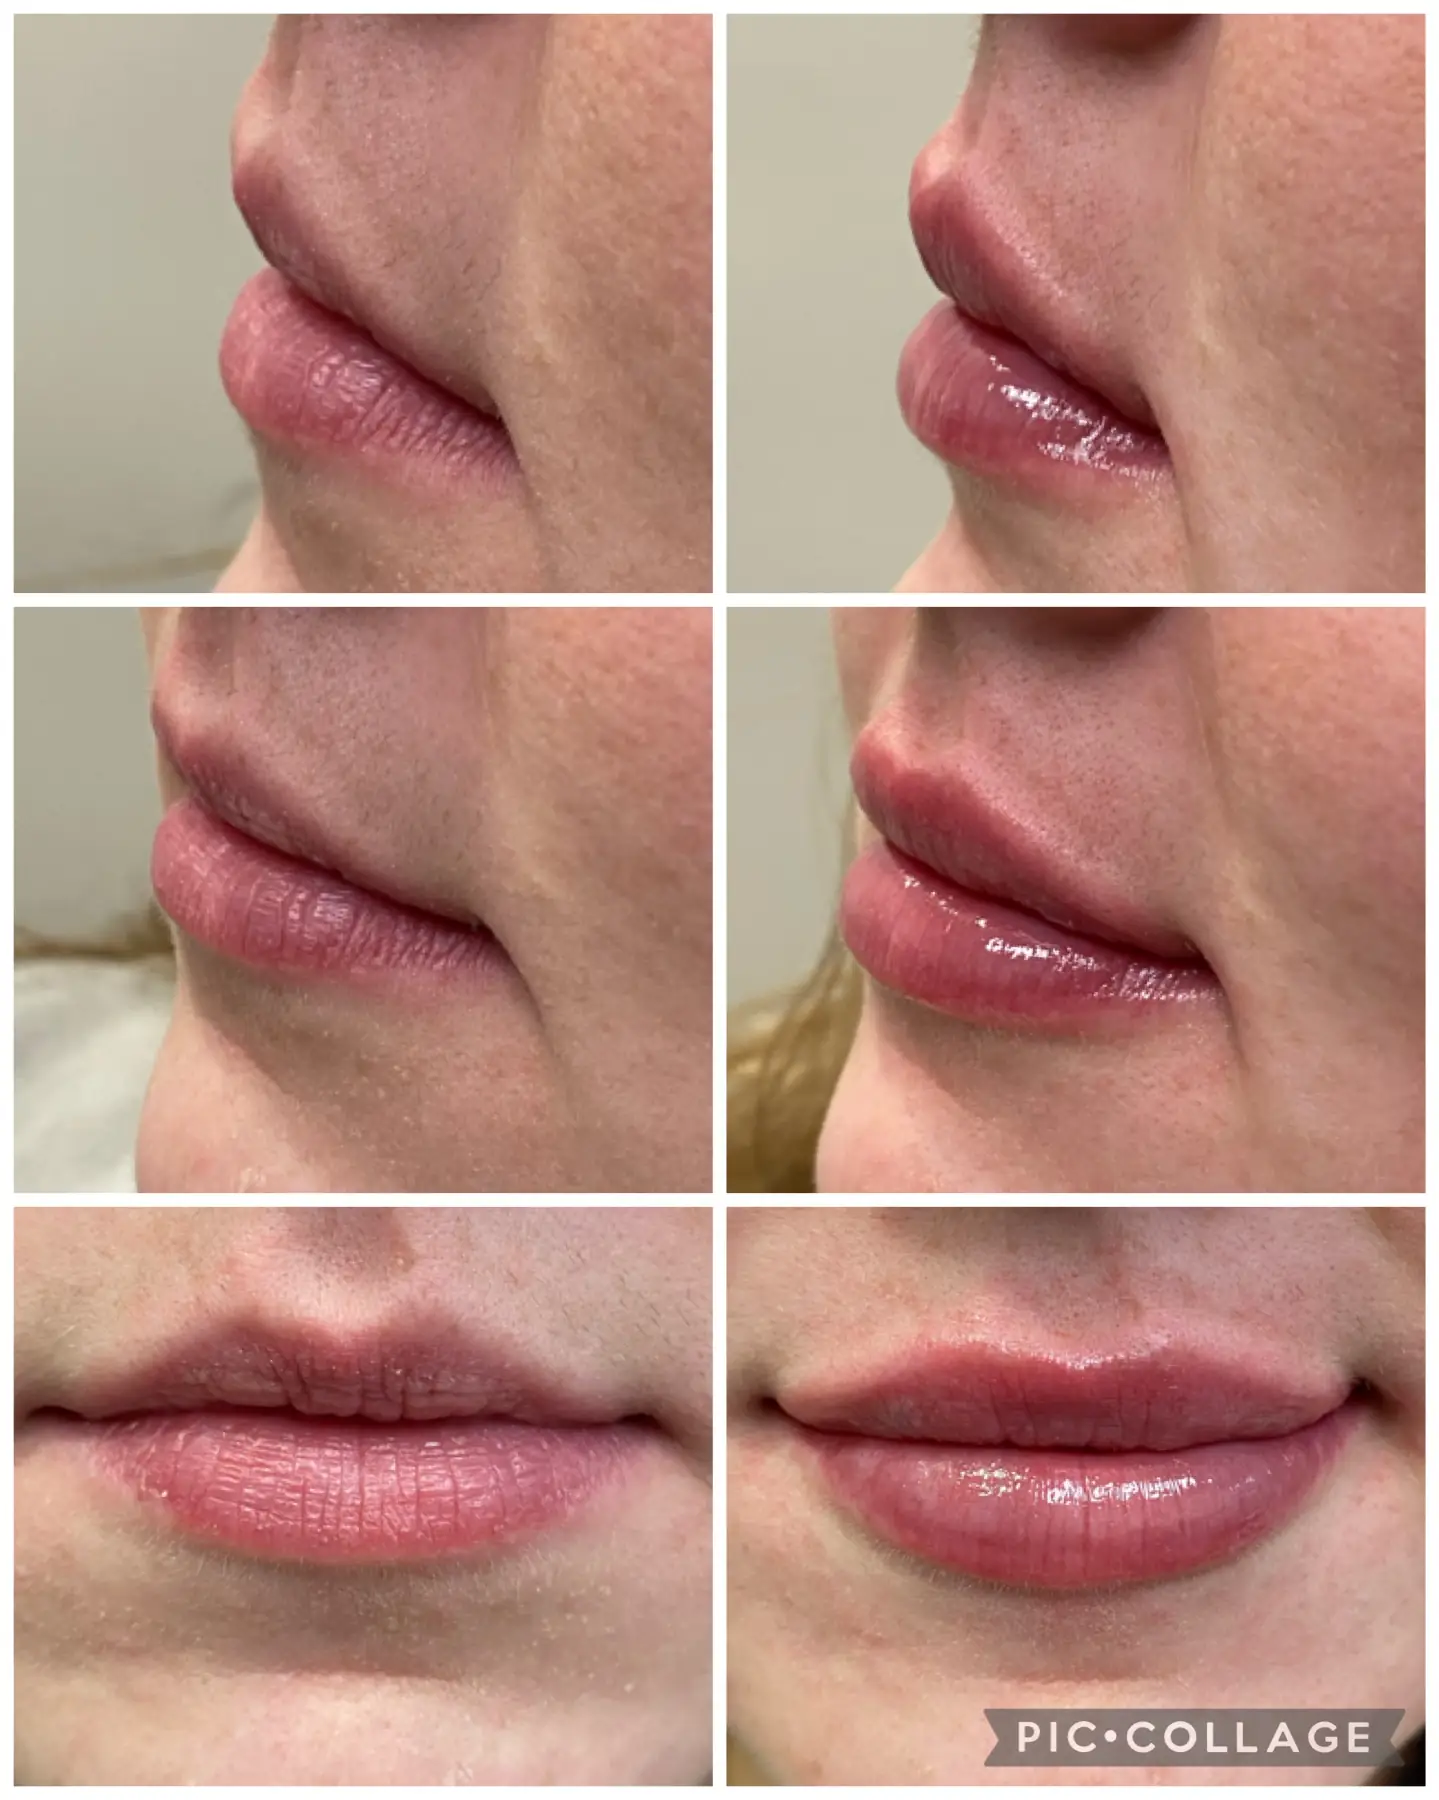 filler before and after